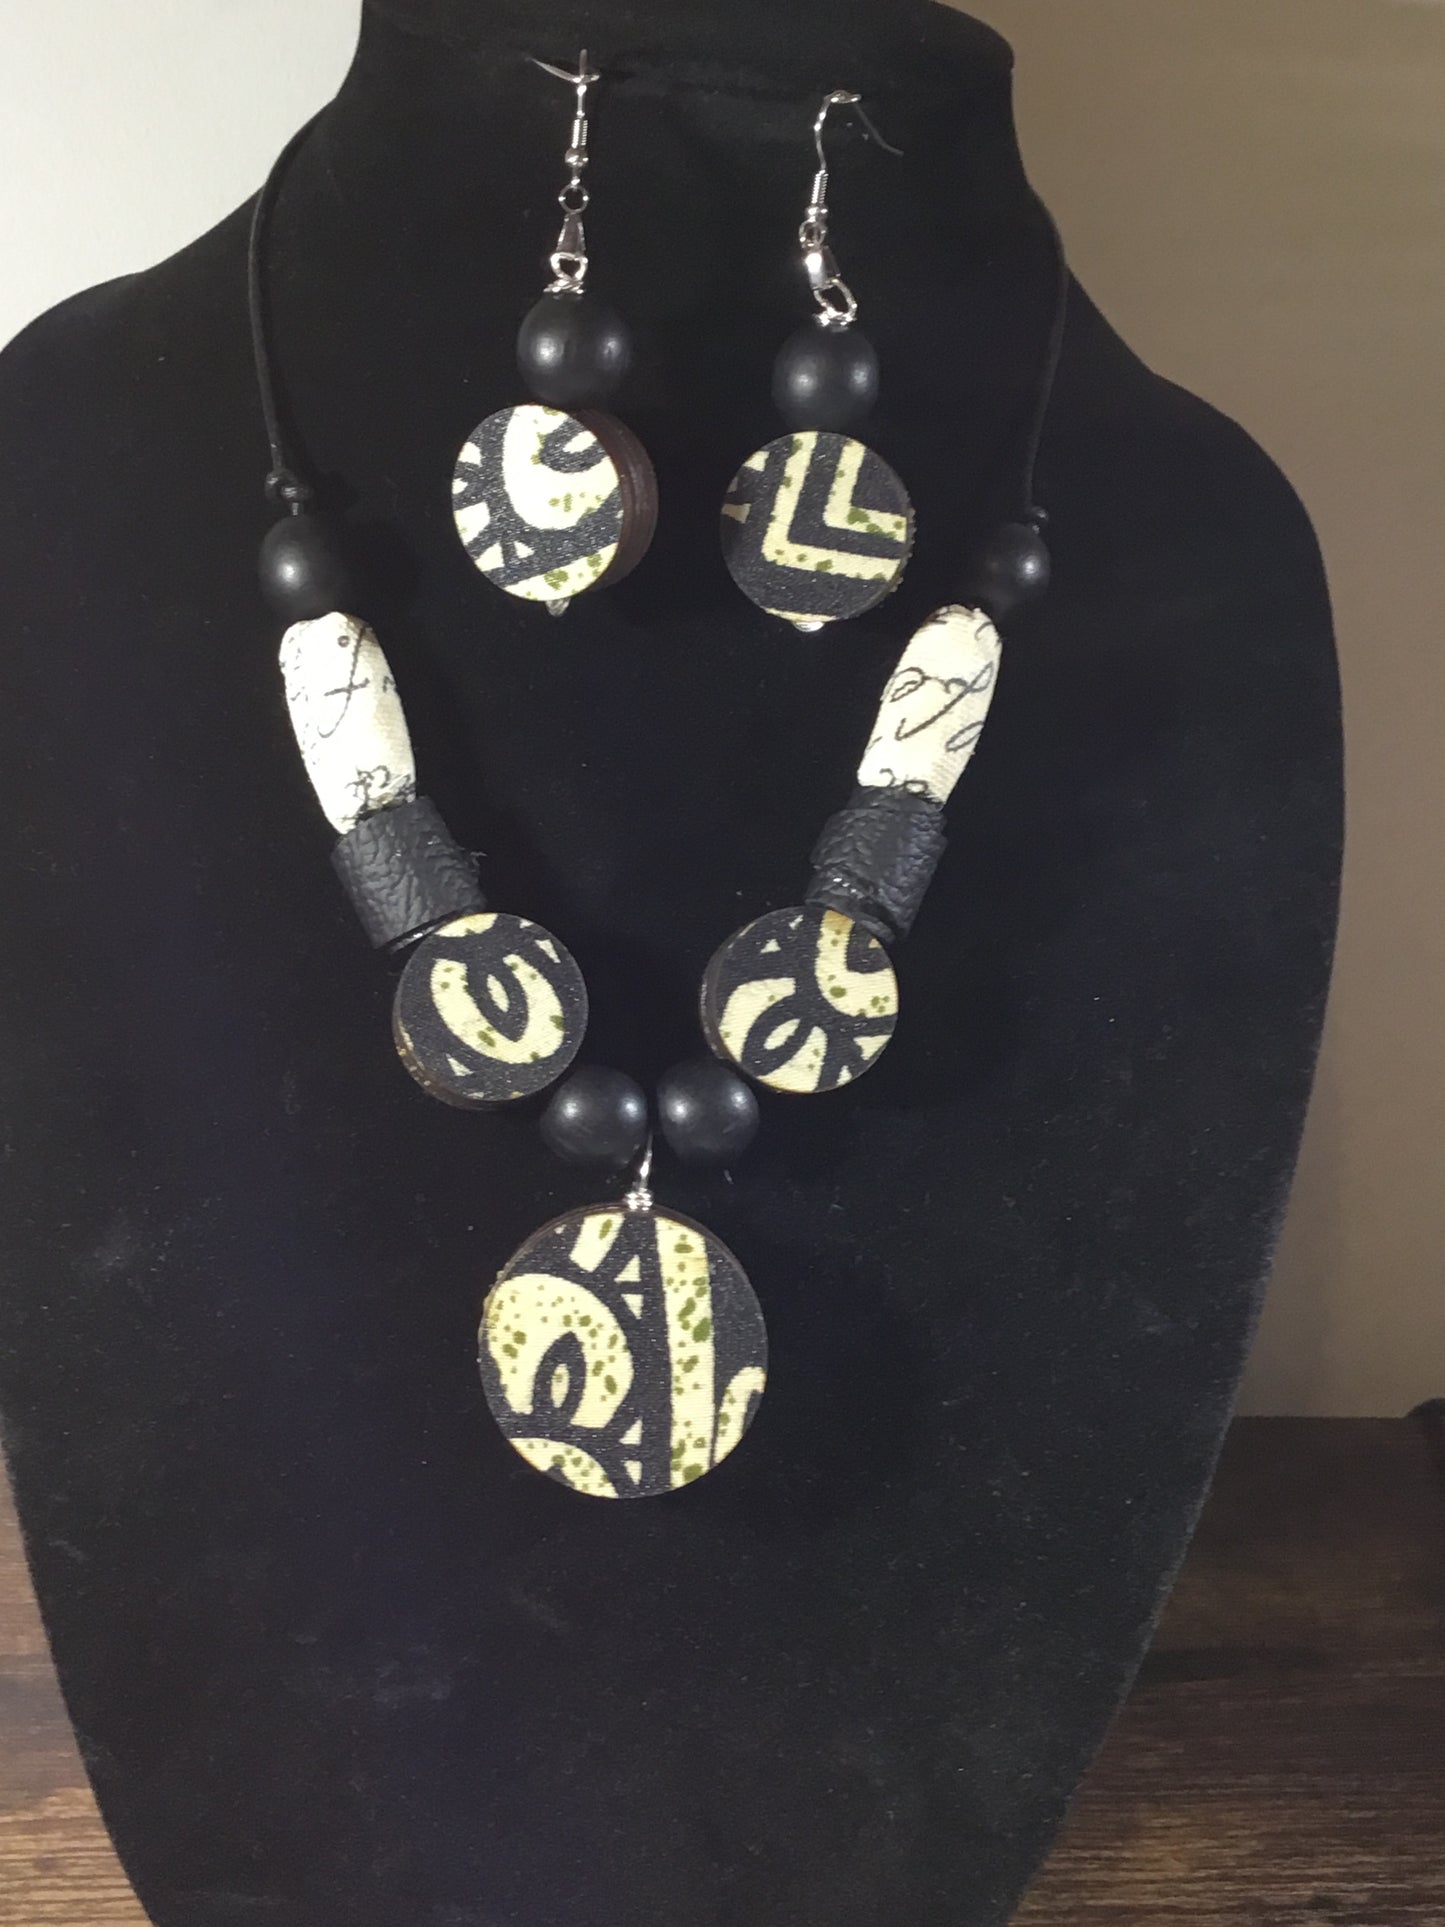 One of a Kind Beaded Necklace-Handmade Beads black/white